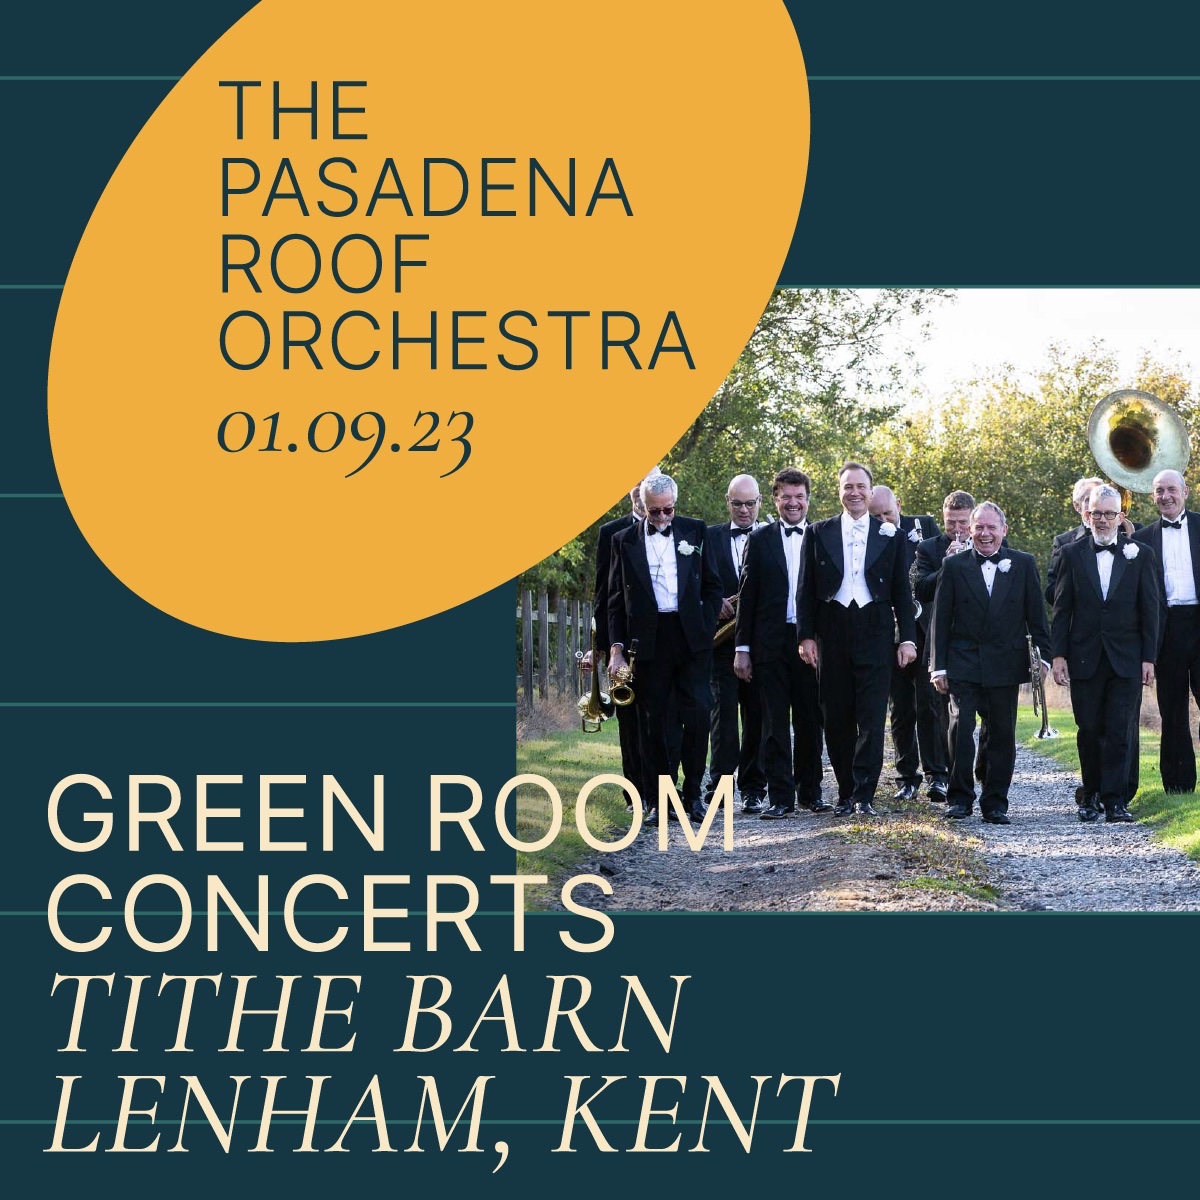 World renowned Pasadena Roof Orchestra launch our festival in under a month! Life enhancing swing from the roaring 20s and 30s! Bring your dancing shoes! Friday 1 Sept 7.30pm Tickets: greenroomconcerts.com #jazz #swingmusic #jazzfm #kent #kentlivemusic @PasadenaOrch